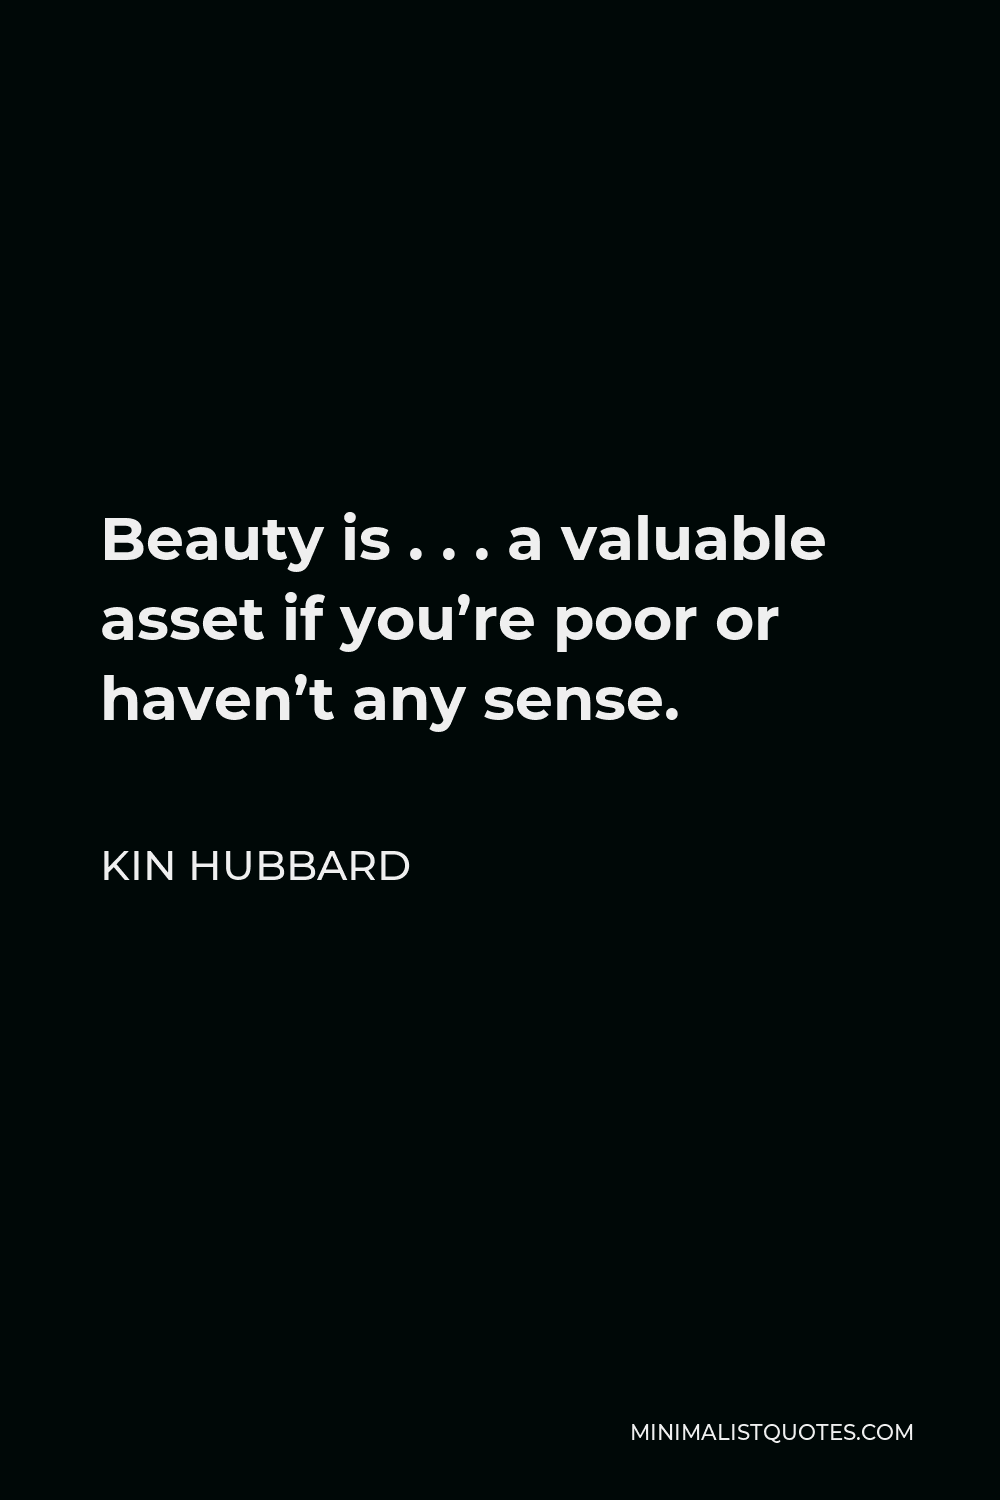 Kin Hubbard Quote - Beauty is . . . a valuable asset if you’re poor or haven’t any sense.